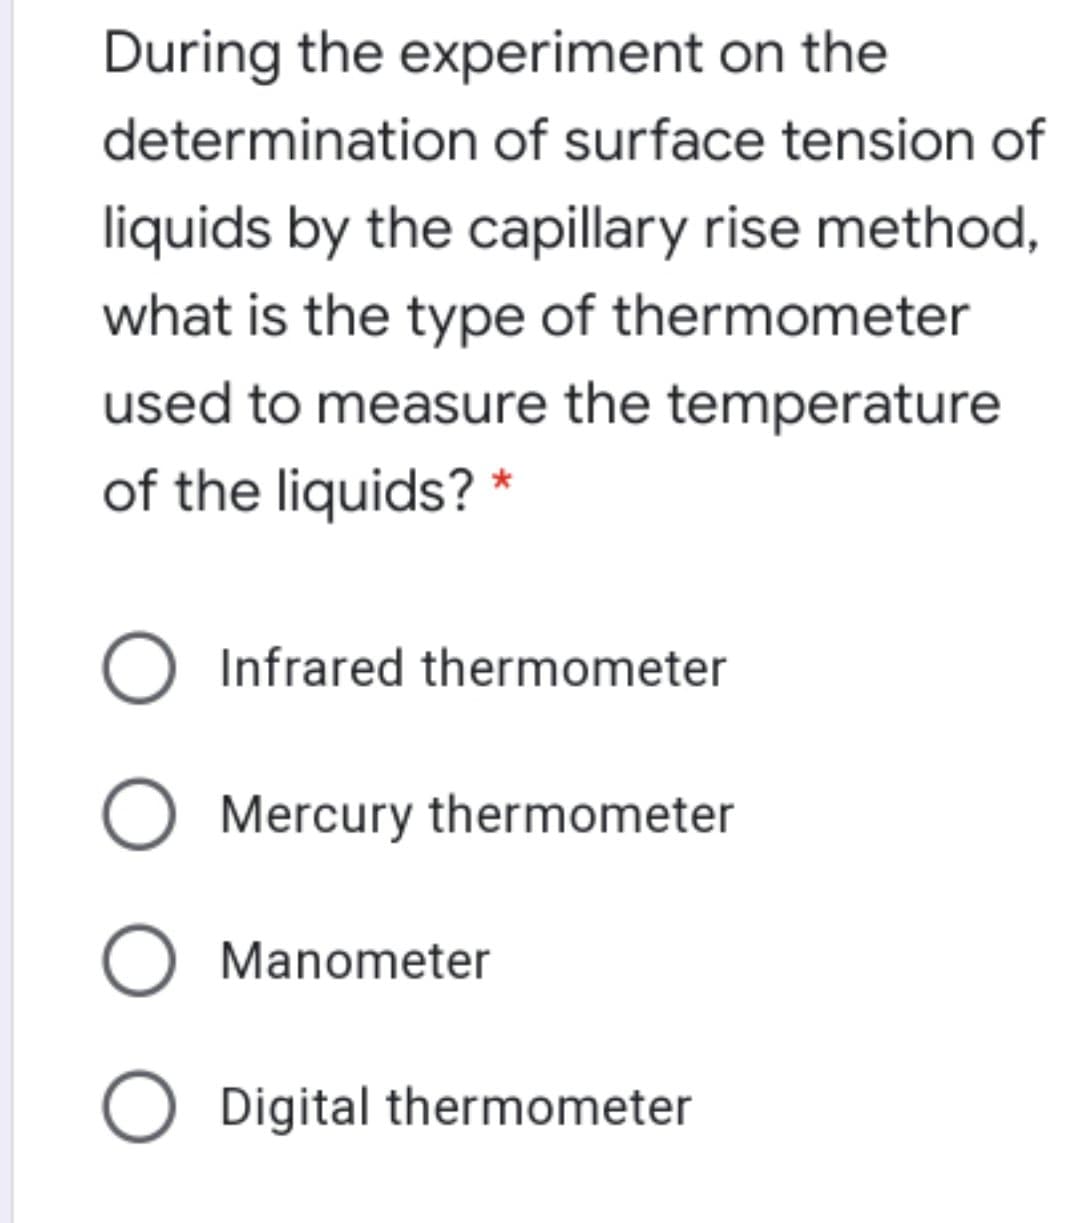 During the experiment on the
determination of surface tension of
liquids by the capillary rise method,
what is the type of thermometer
used to measure the temperature
of the liquids? *
Infrared thermometer
O Mercury thermometer
O Manometer
O Digital thermometer
